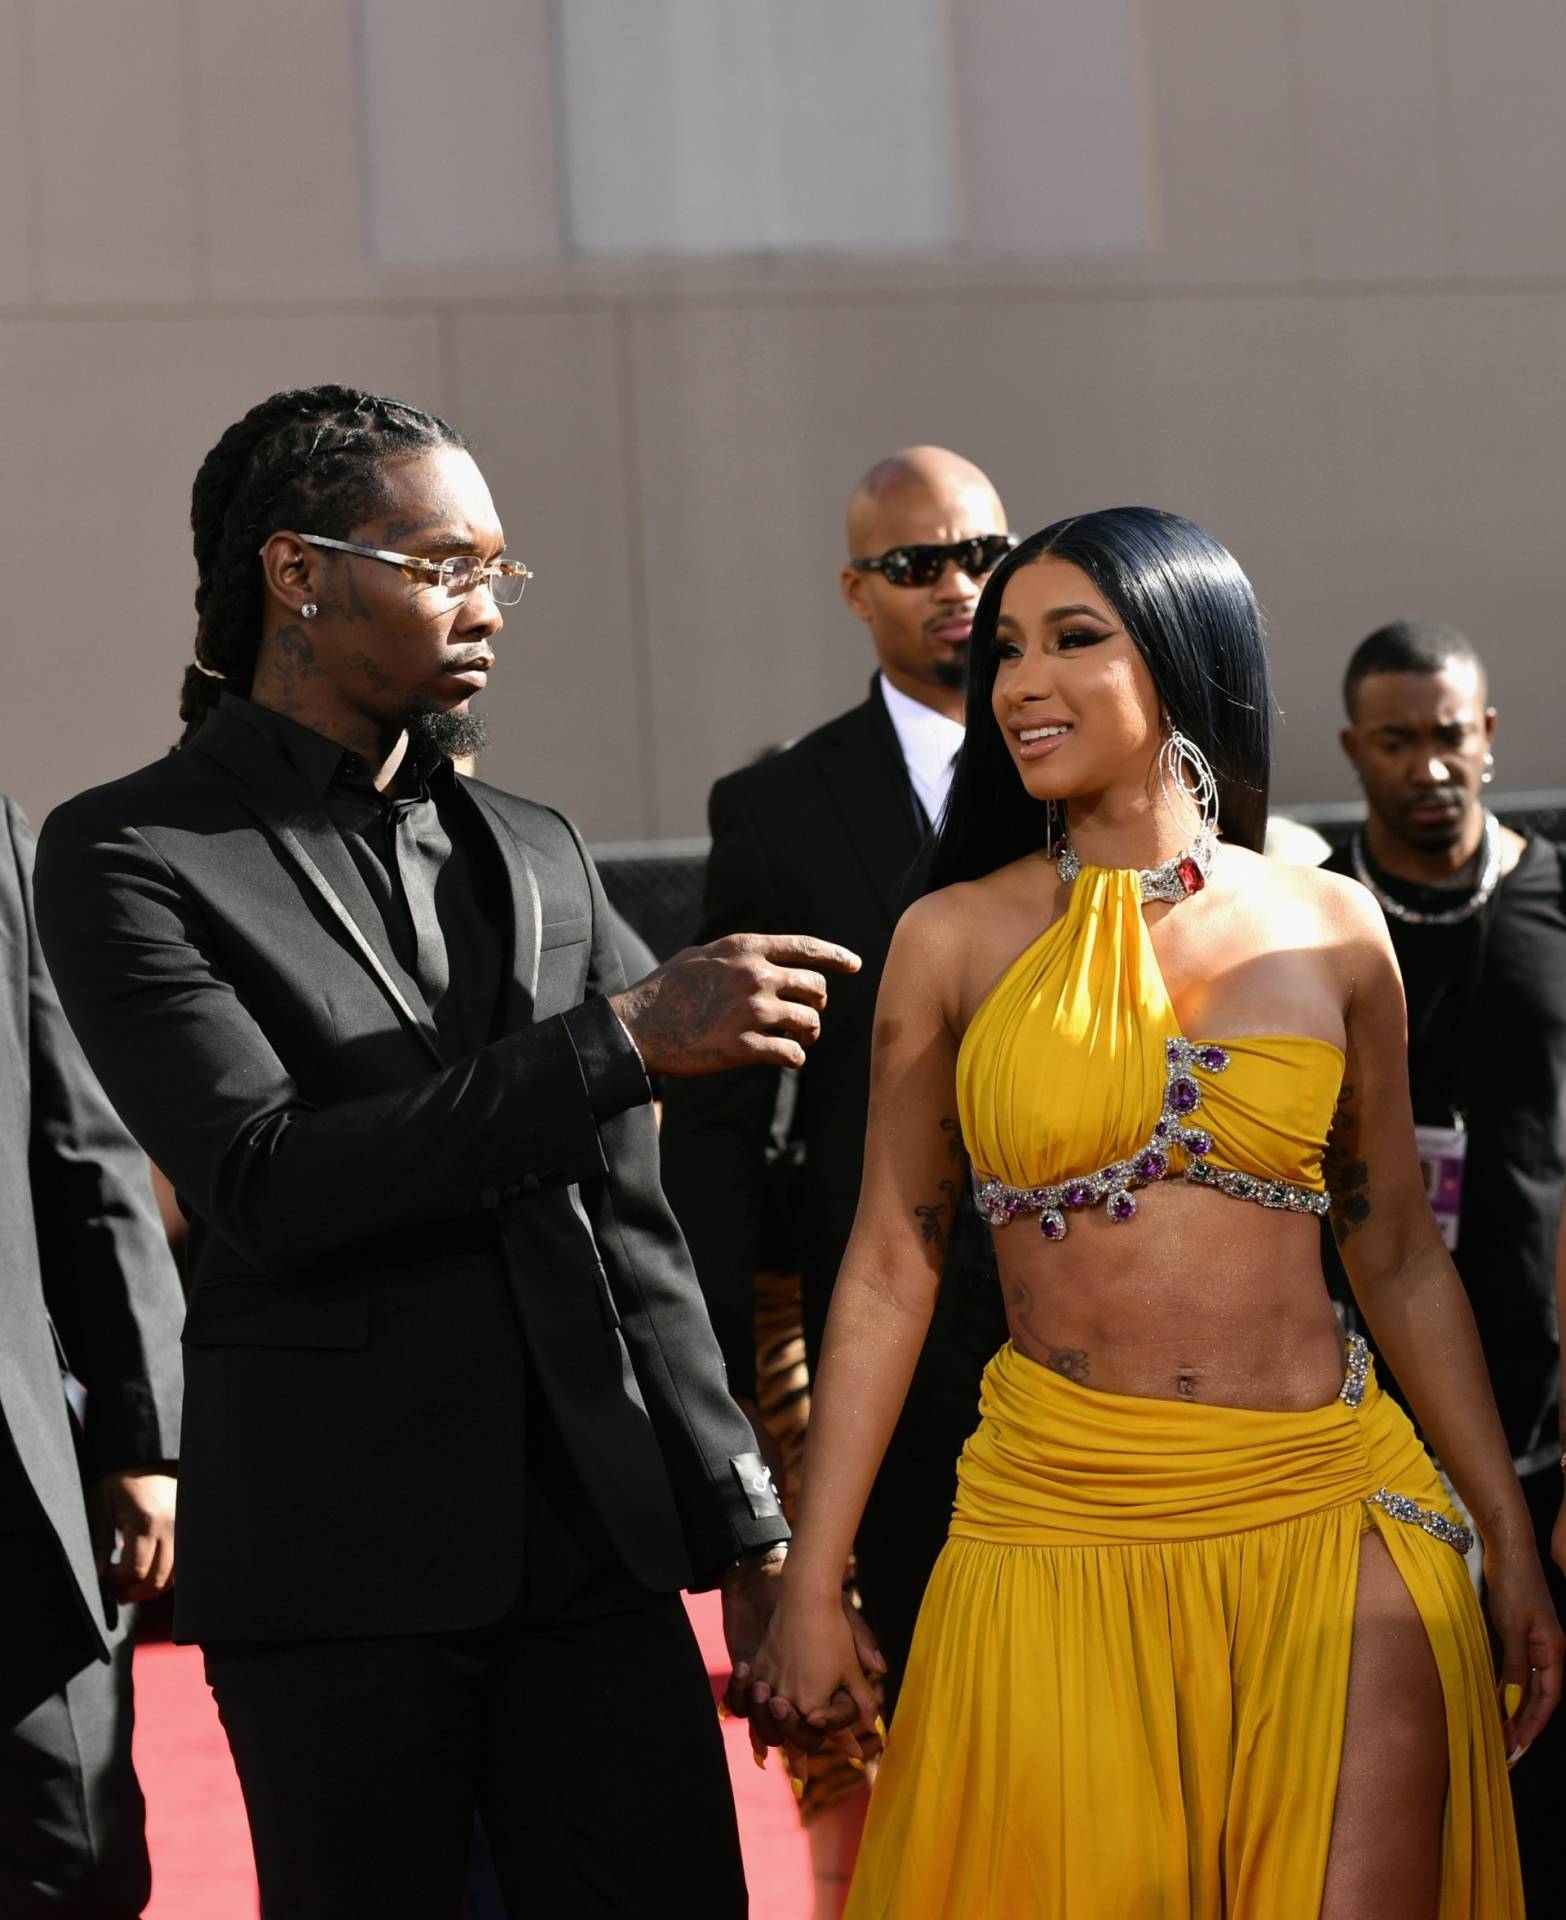 Offset of Migos and Cardi B attend the 2019 Billboard 